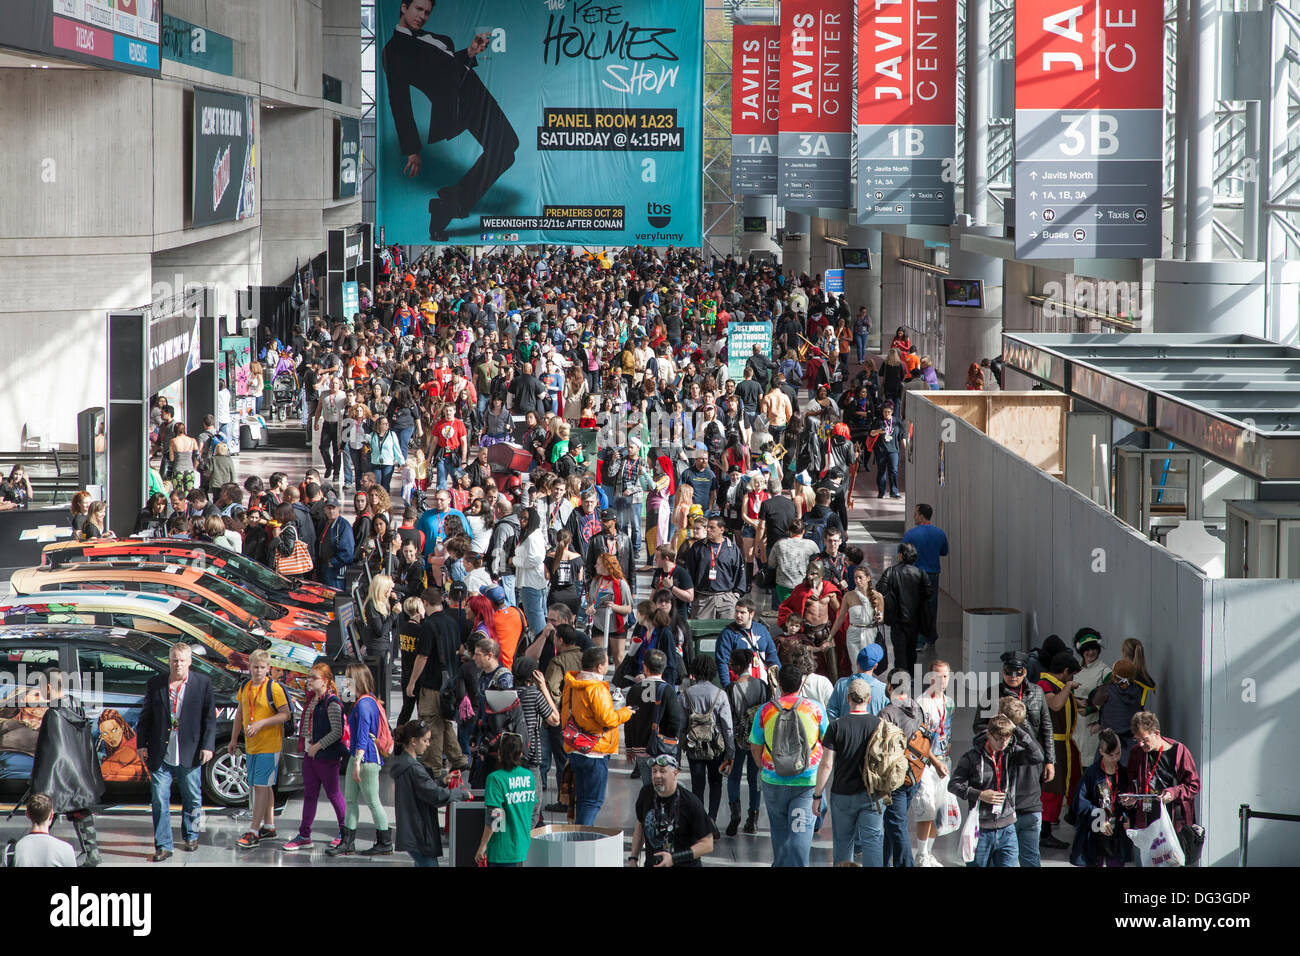 NEW YORK - October 13: General view of atmosphere during Comic Con 2013 at The Jacob K. Javits Convention Center on October 13, 2013 in New York City. Stock Photo